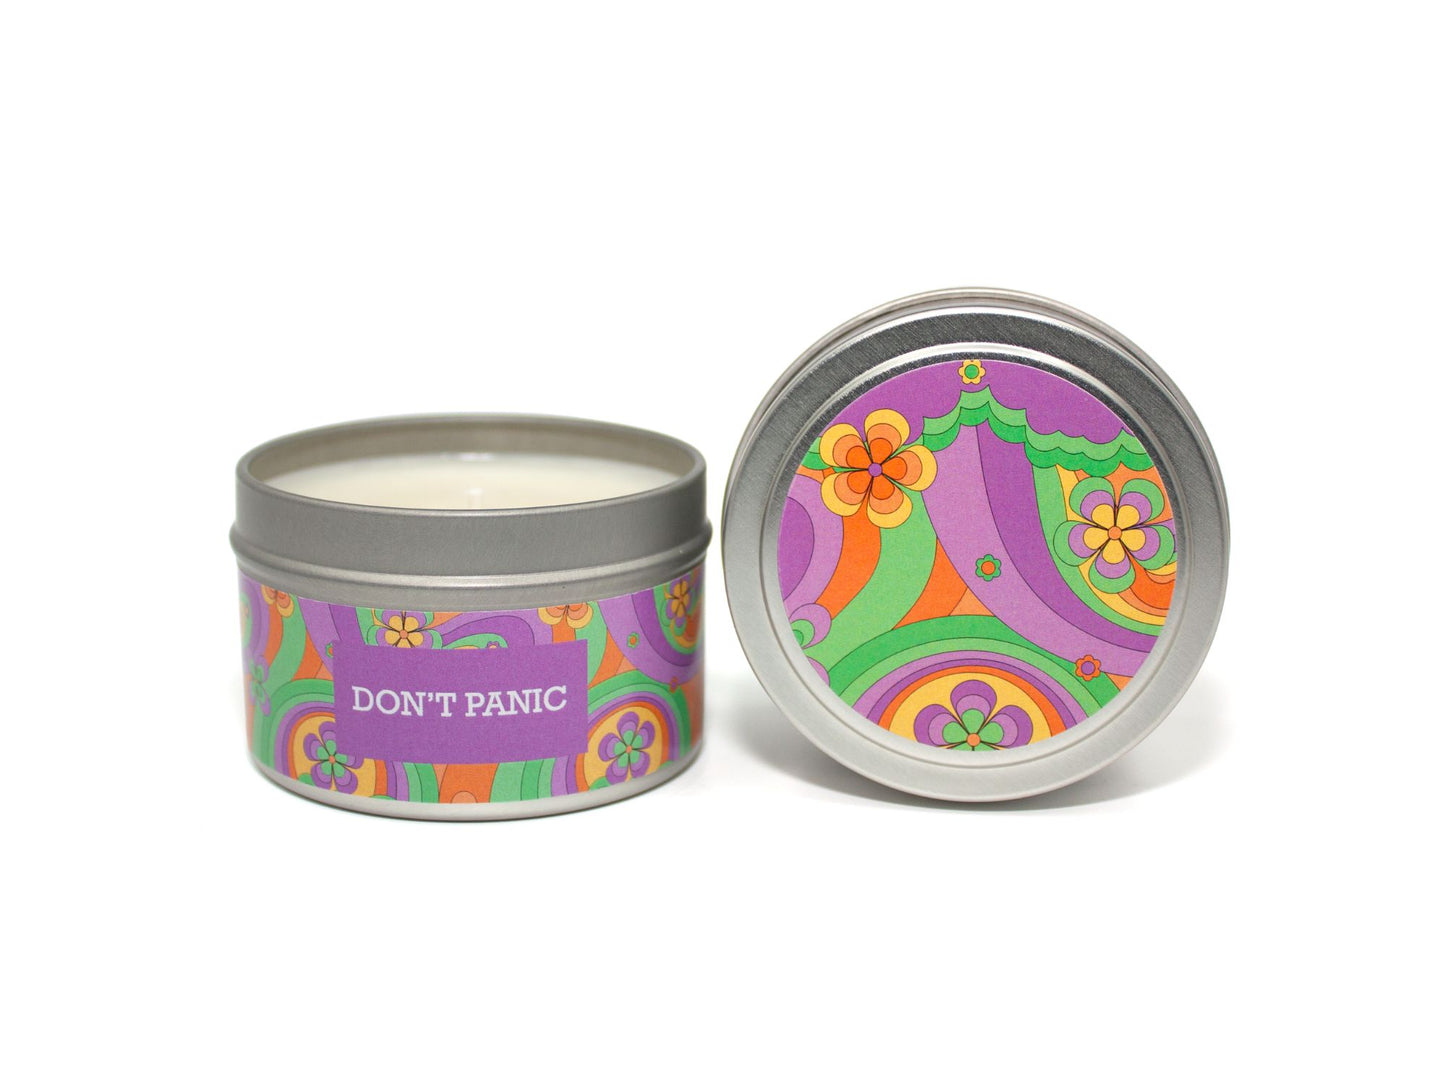 Onset & Rime relaxing lavendar scented candle called "Don't Panic" in a 4 oz silver tin. The circular label on top is a wavy psychedelic pattern with purple, green and orange flowers. The text on the front label is "Don't Panic - Lavender, Orange, Lime, Tonka Bean".